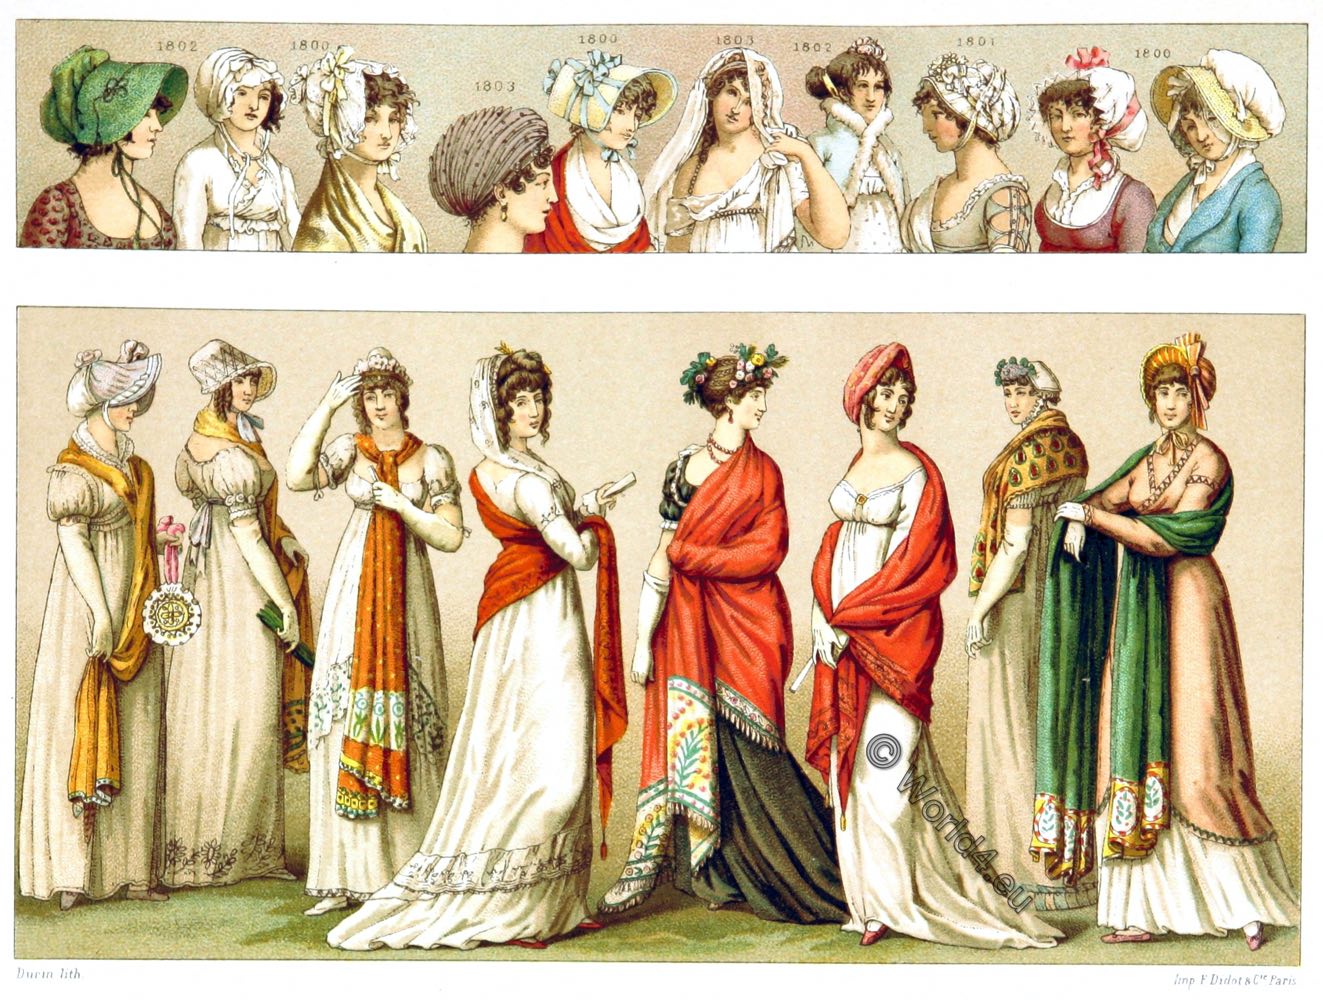 Empire Fashion and Hairstyles from 1800 to 1810.